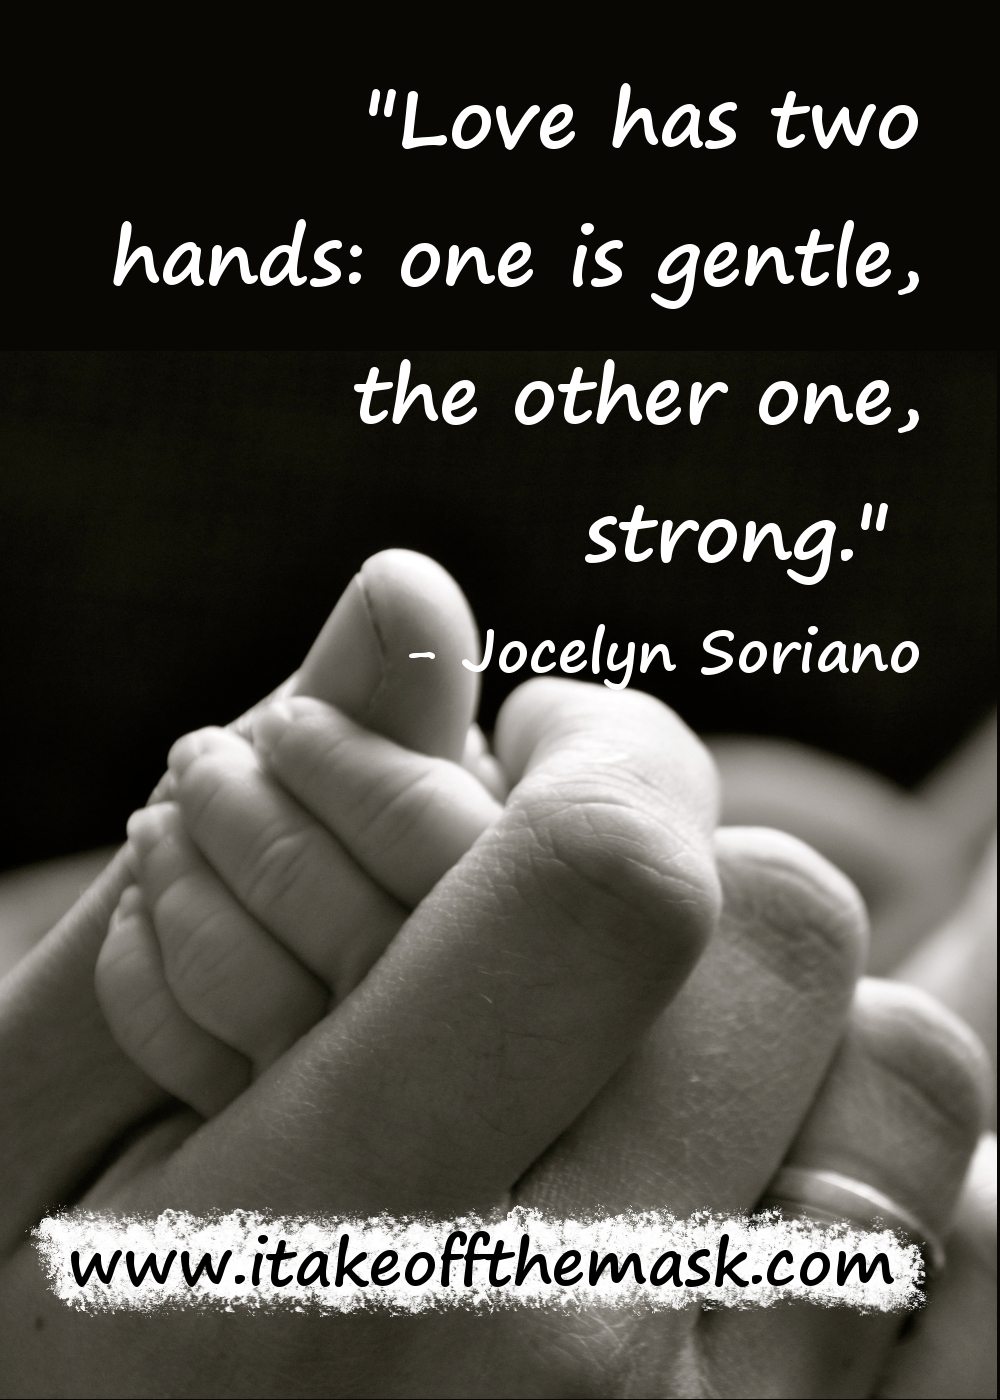 two hands together images